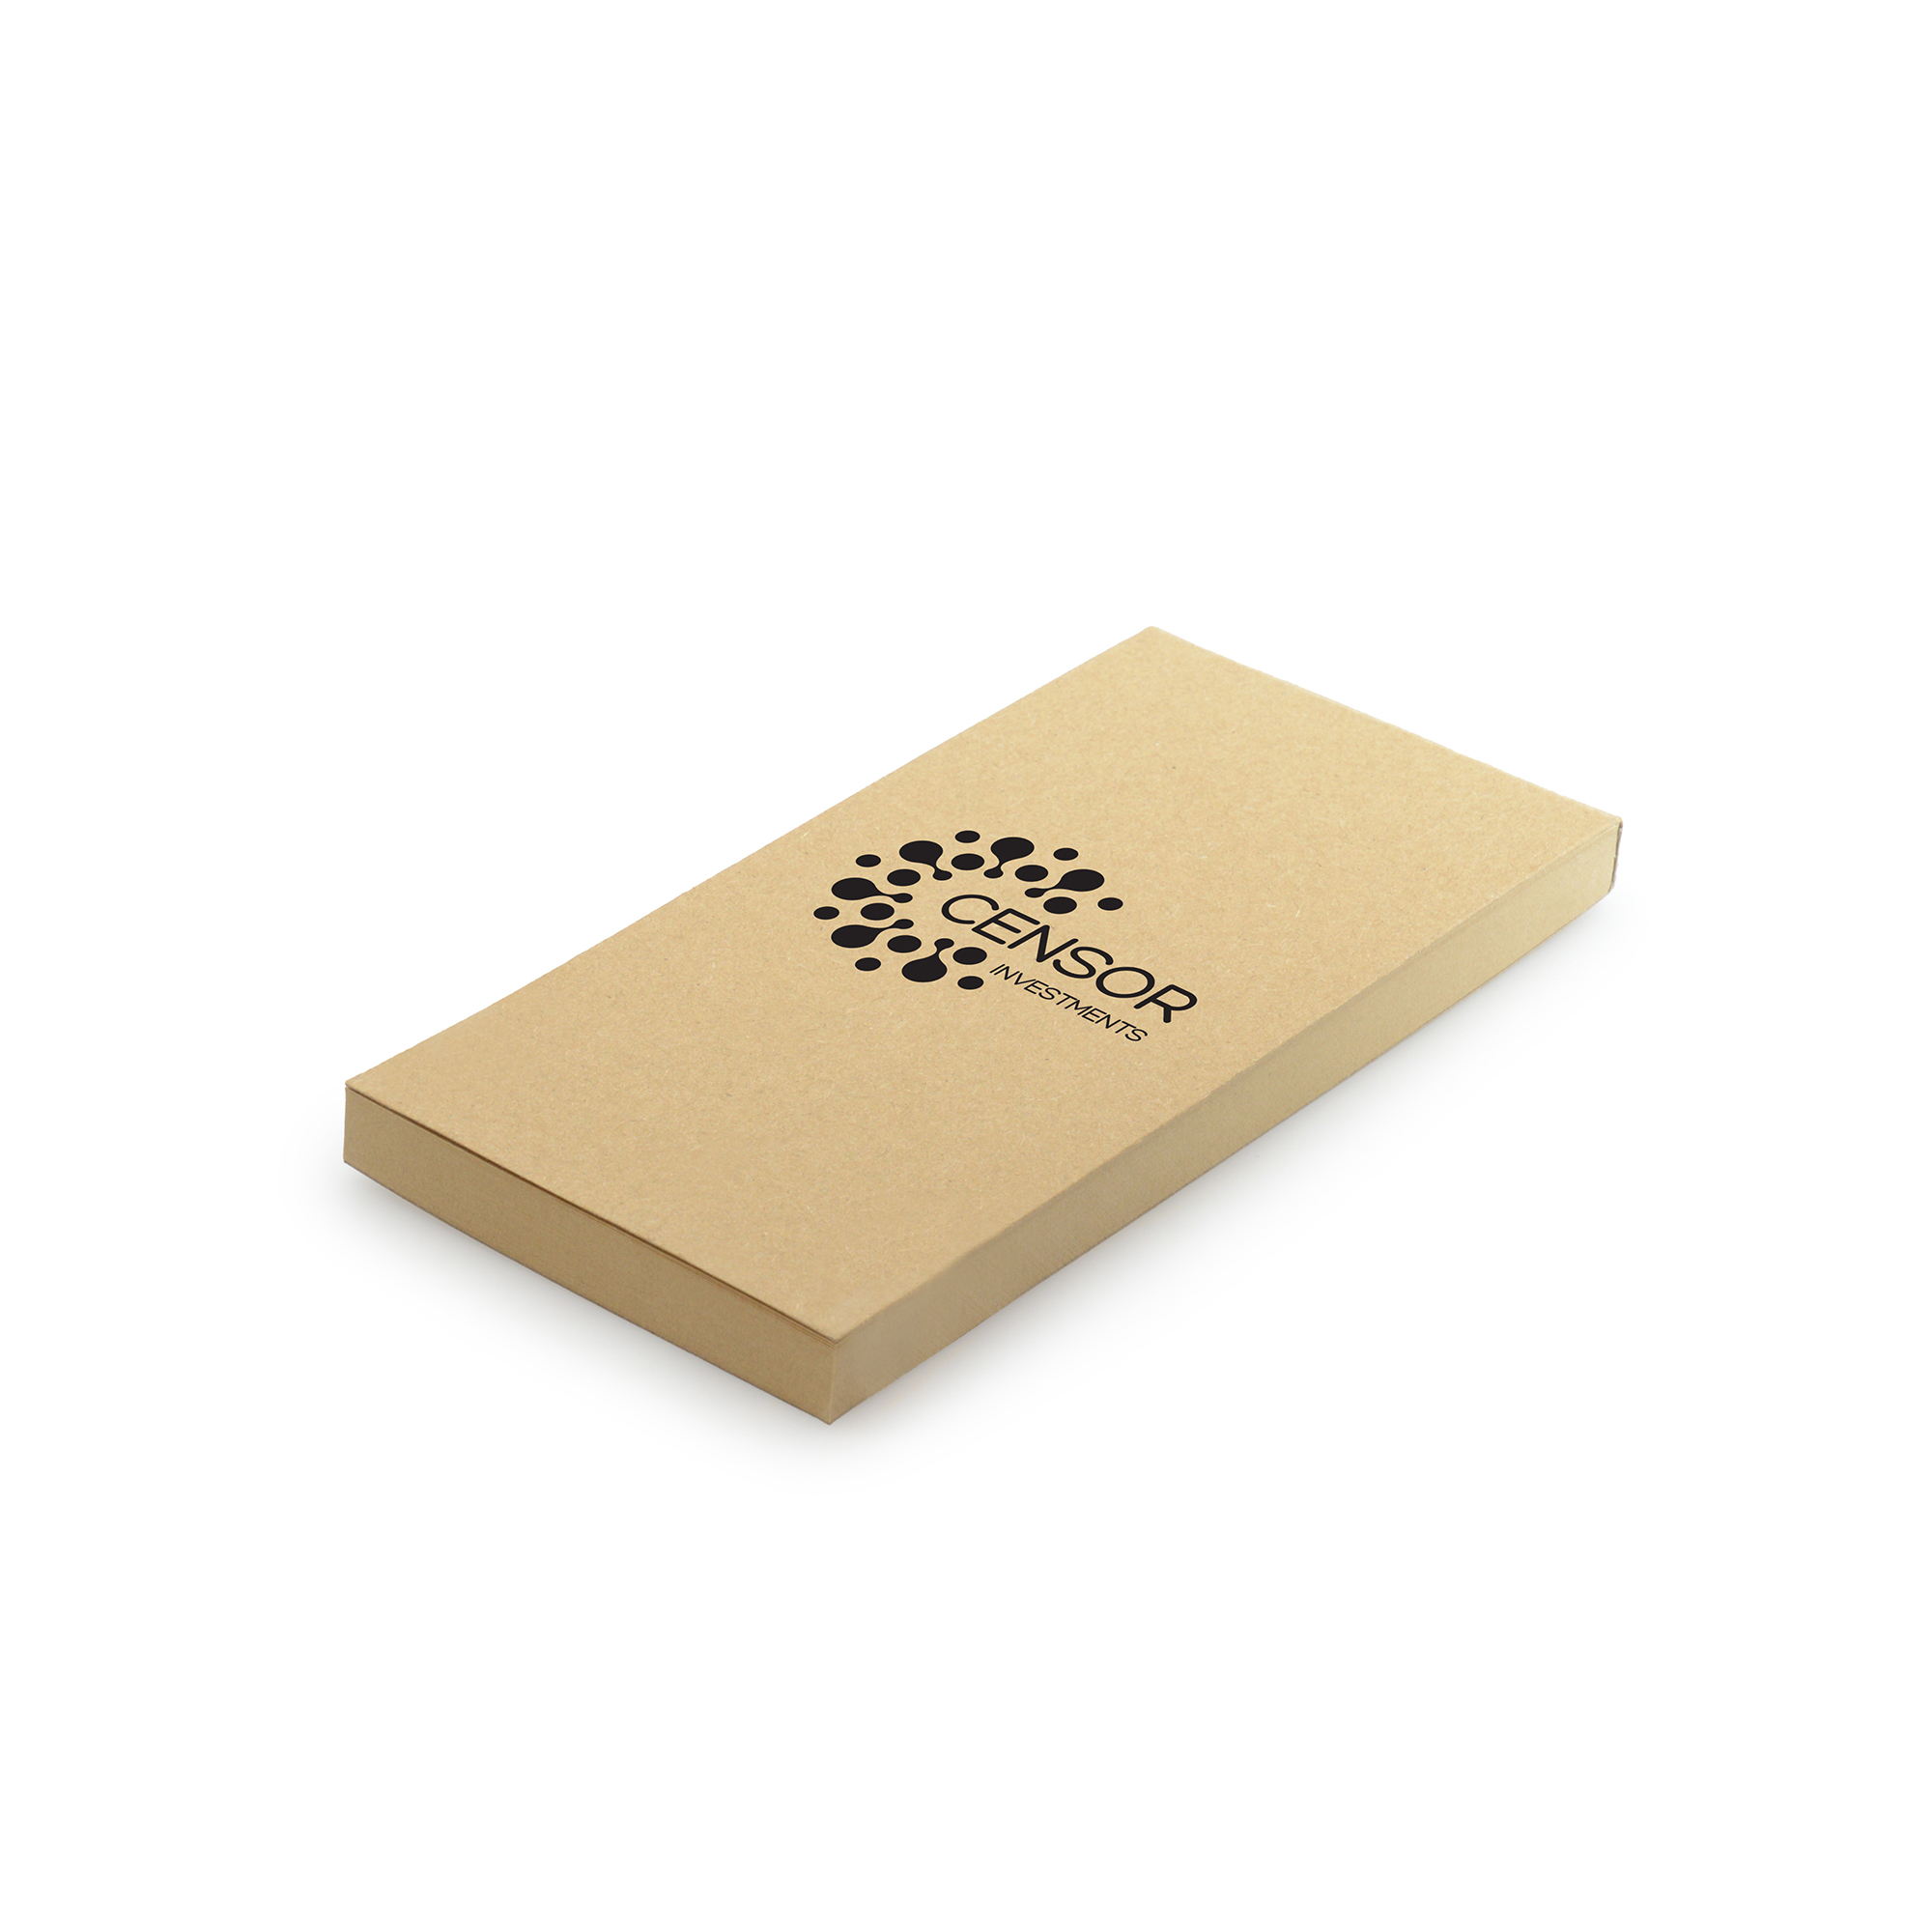 Slimline eco jotter notebook made from Kraft paper and cardboard. 100 lined pages inside for notes and scribbles on the go.